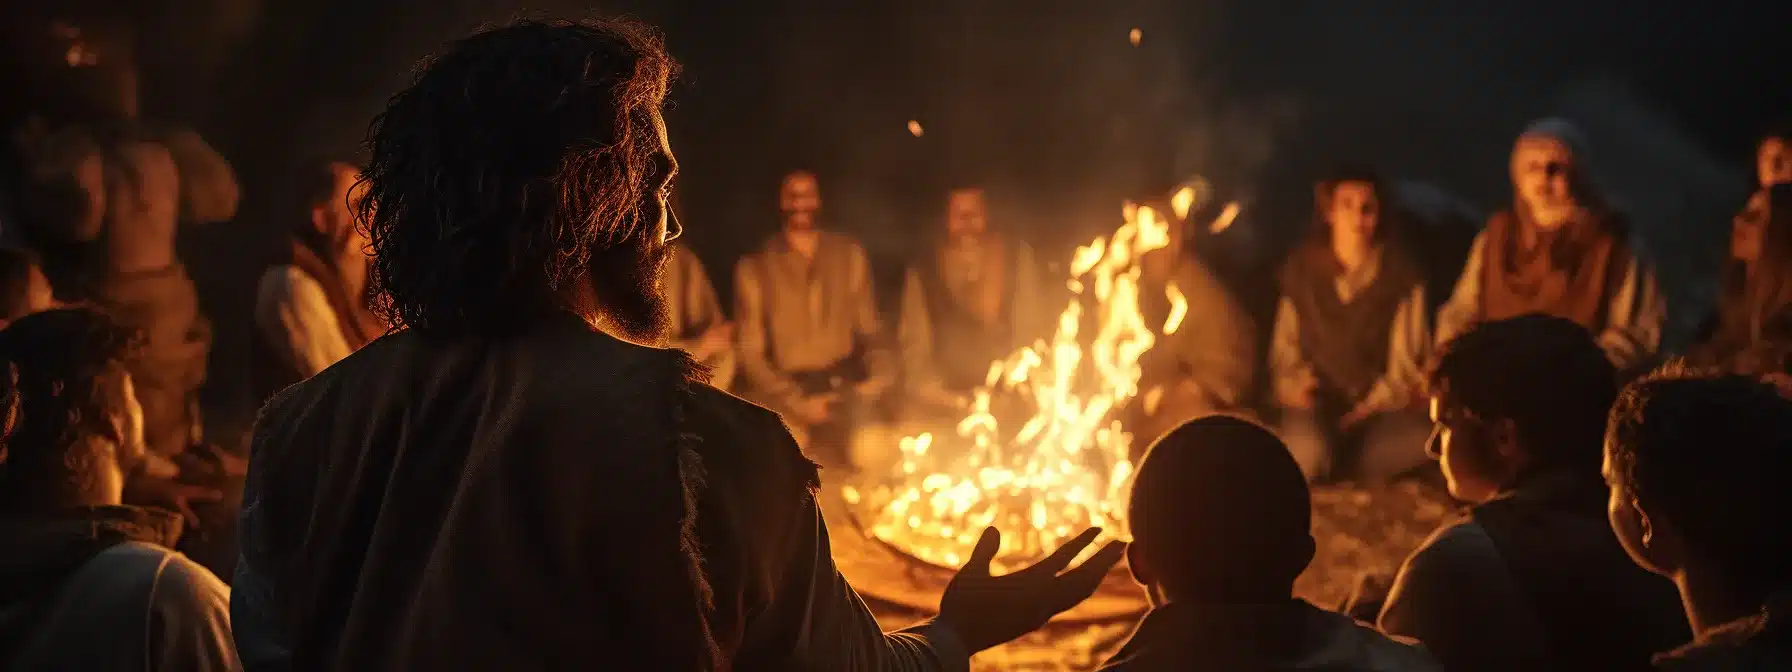 A Captivating Bonfire Storyteller Holds The Attention Of A Mesmerized Audience.